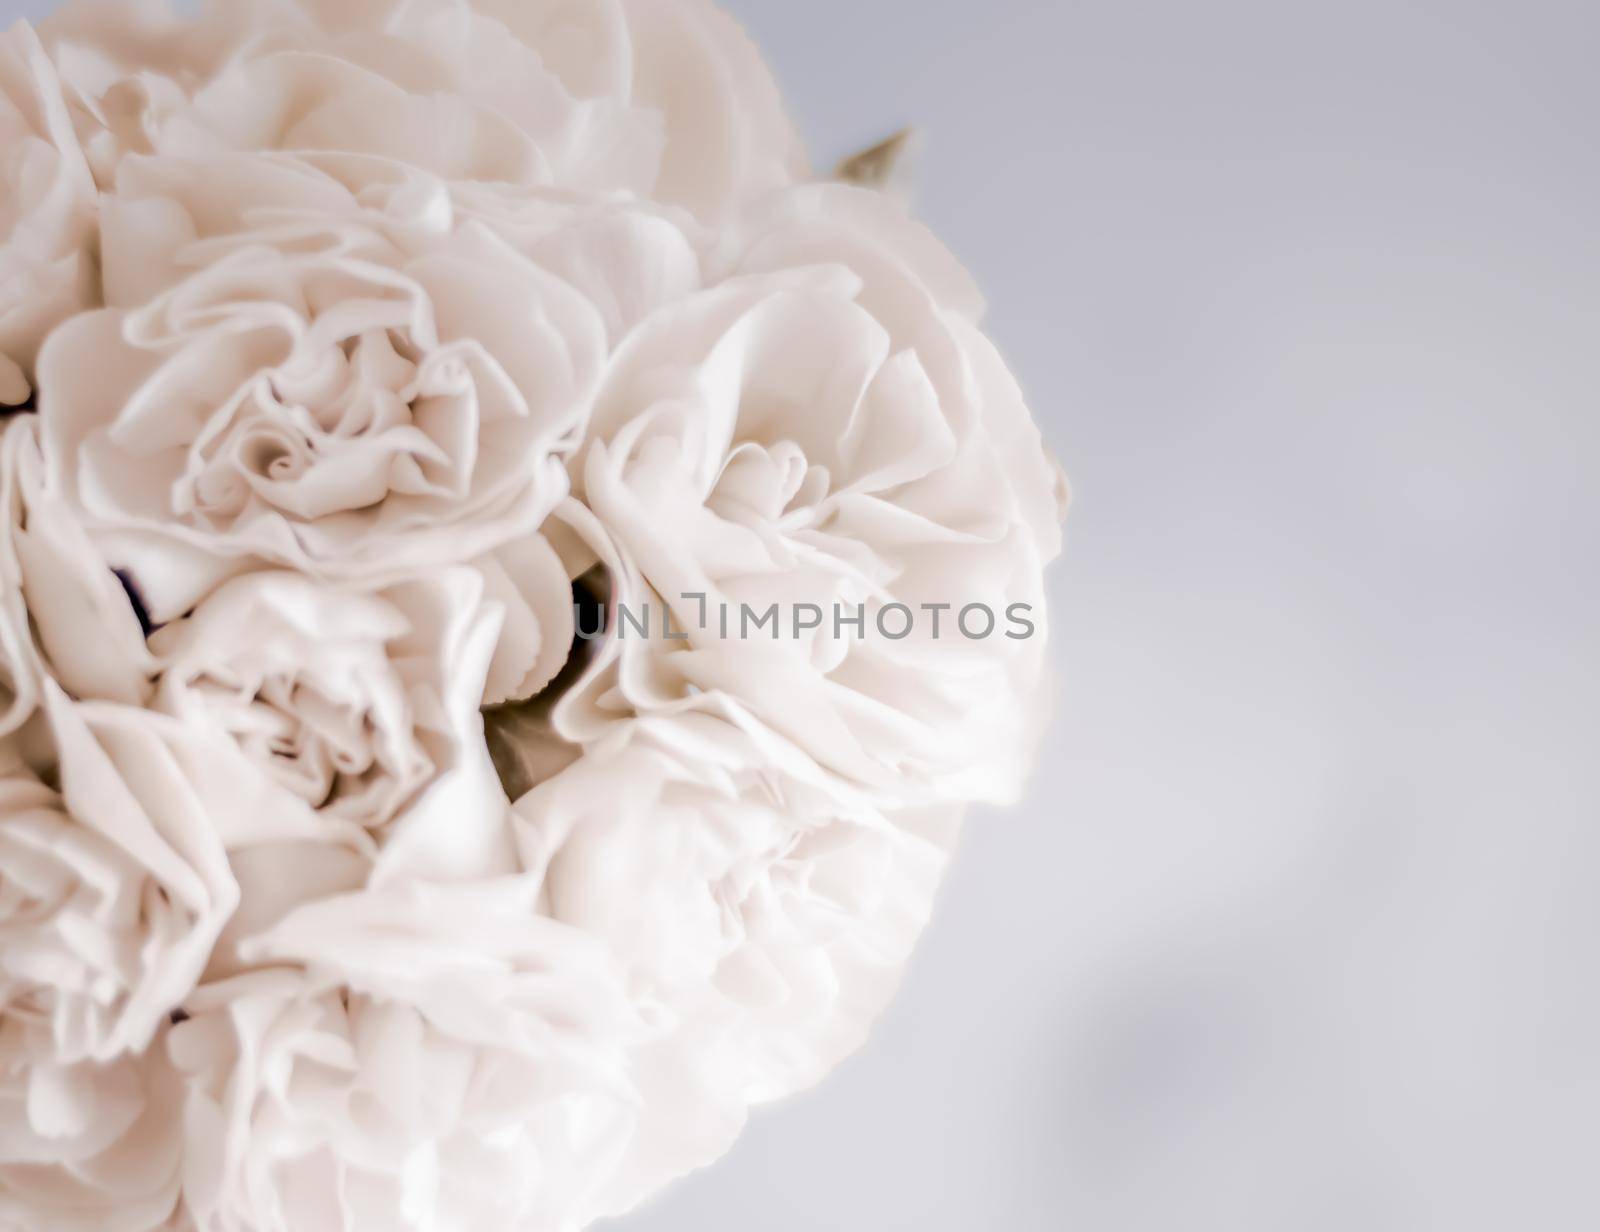 Bridal bouquet of white roses - wedding day, floral beauty, luxury event decoration concept. The happiest day of our lives